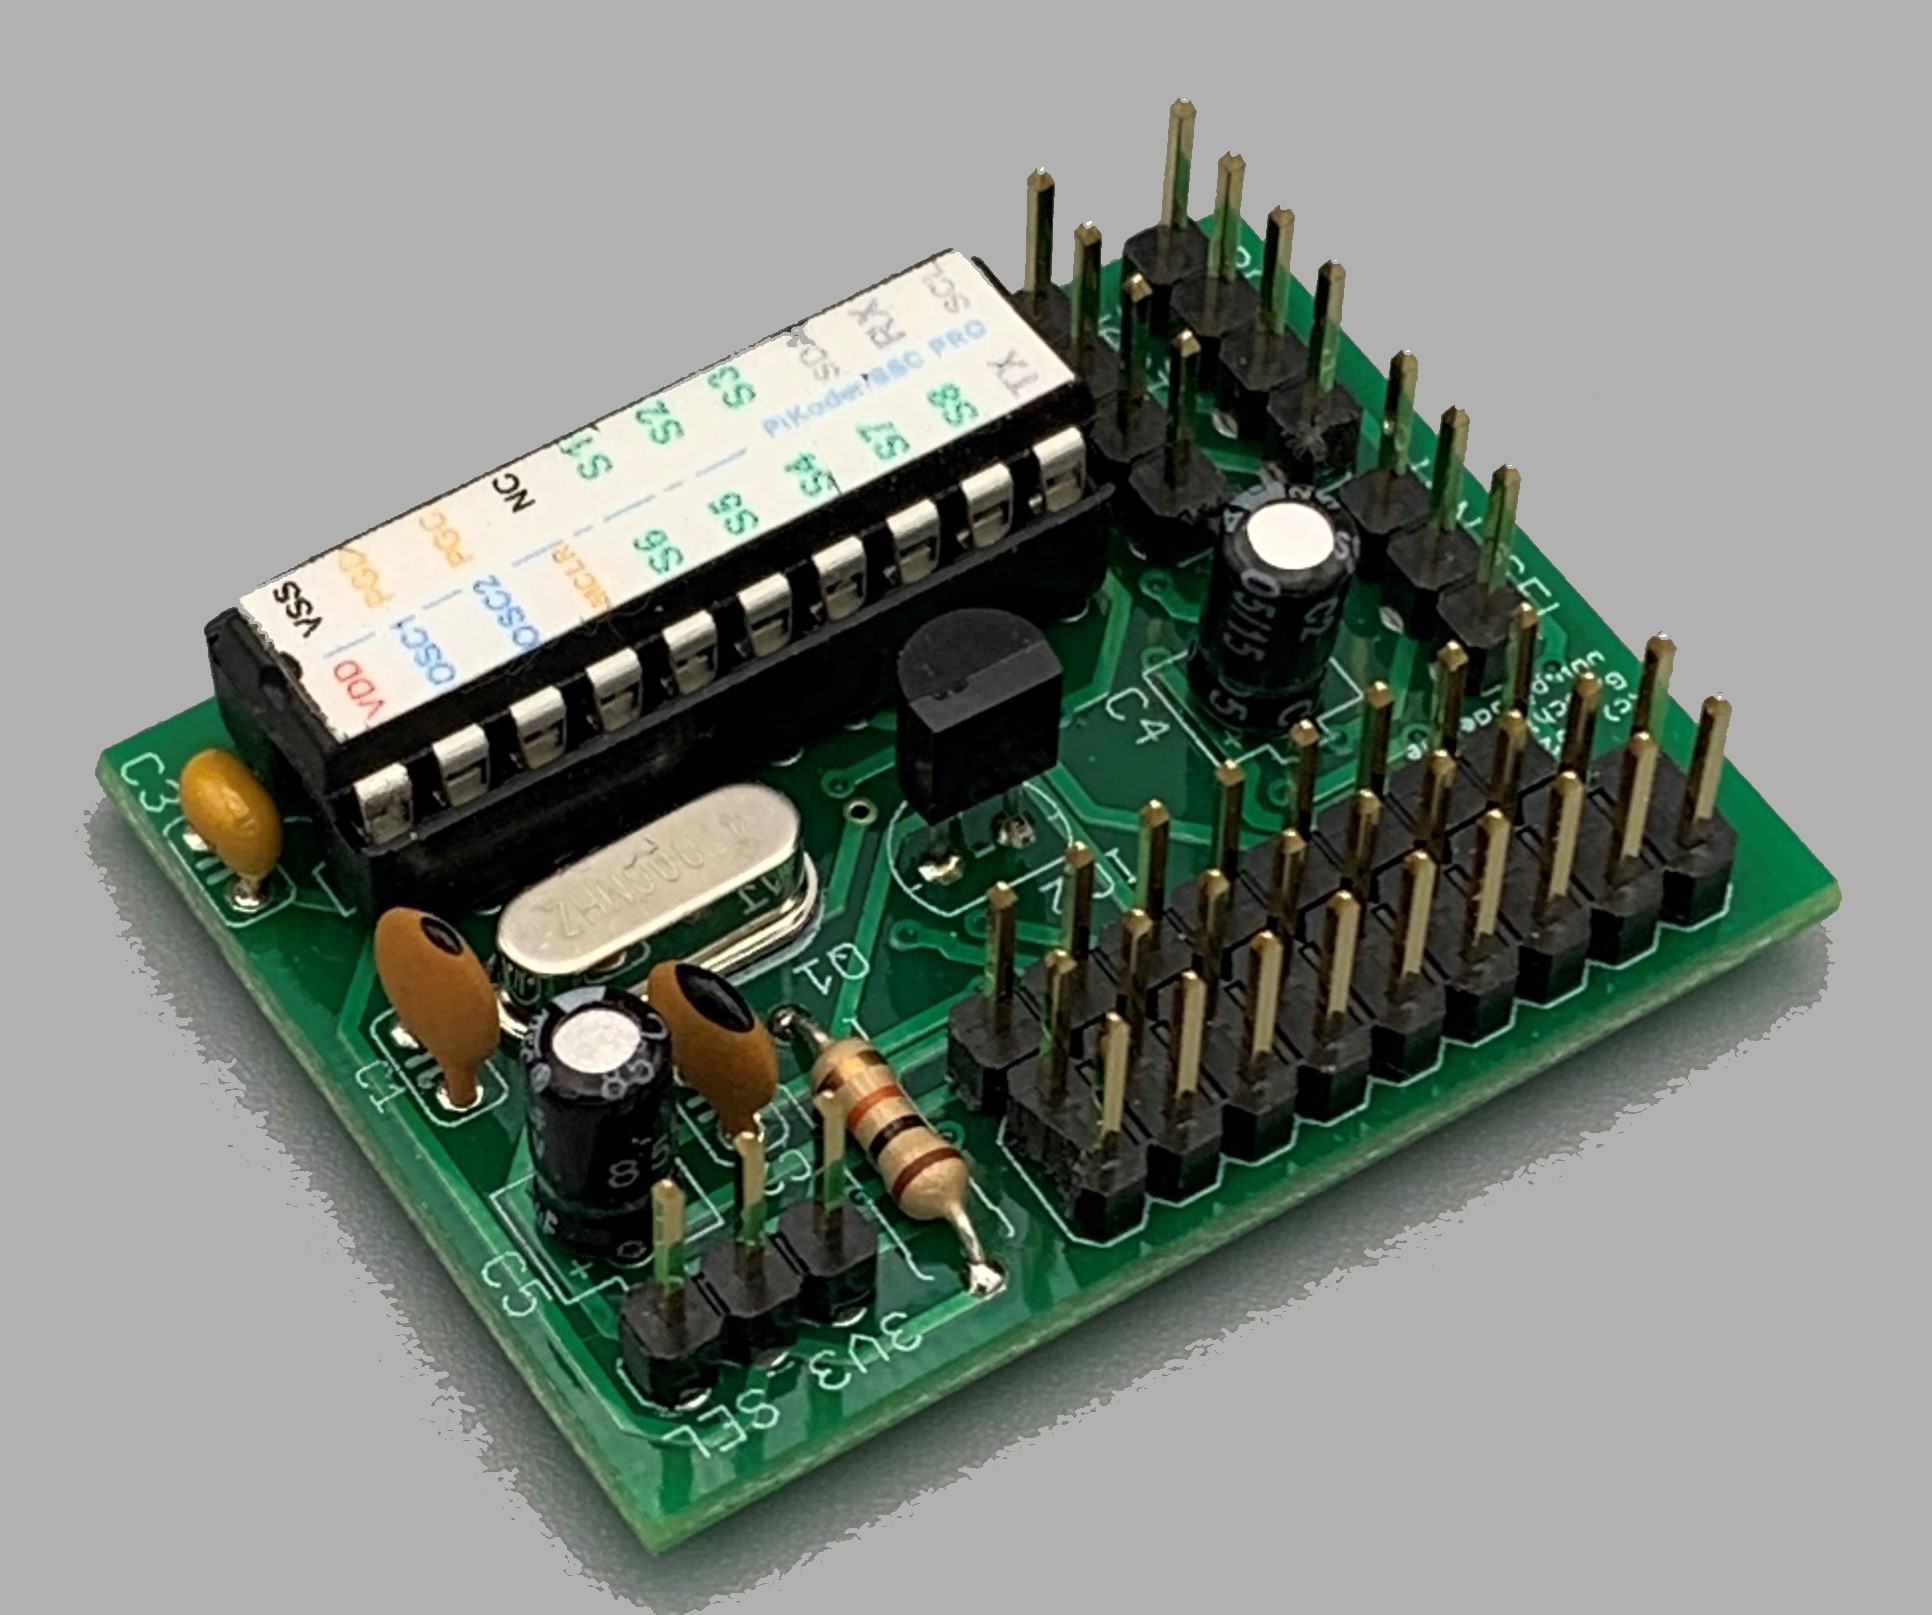 PiKoder engineering boards